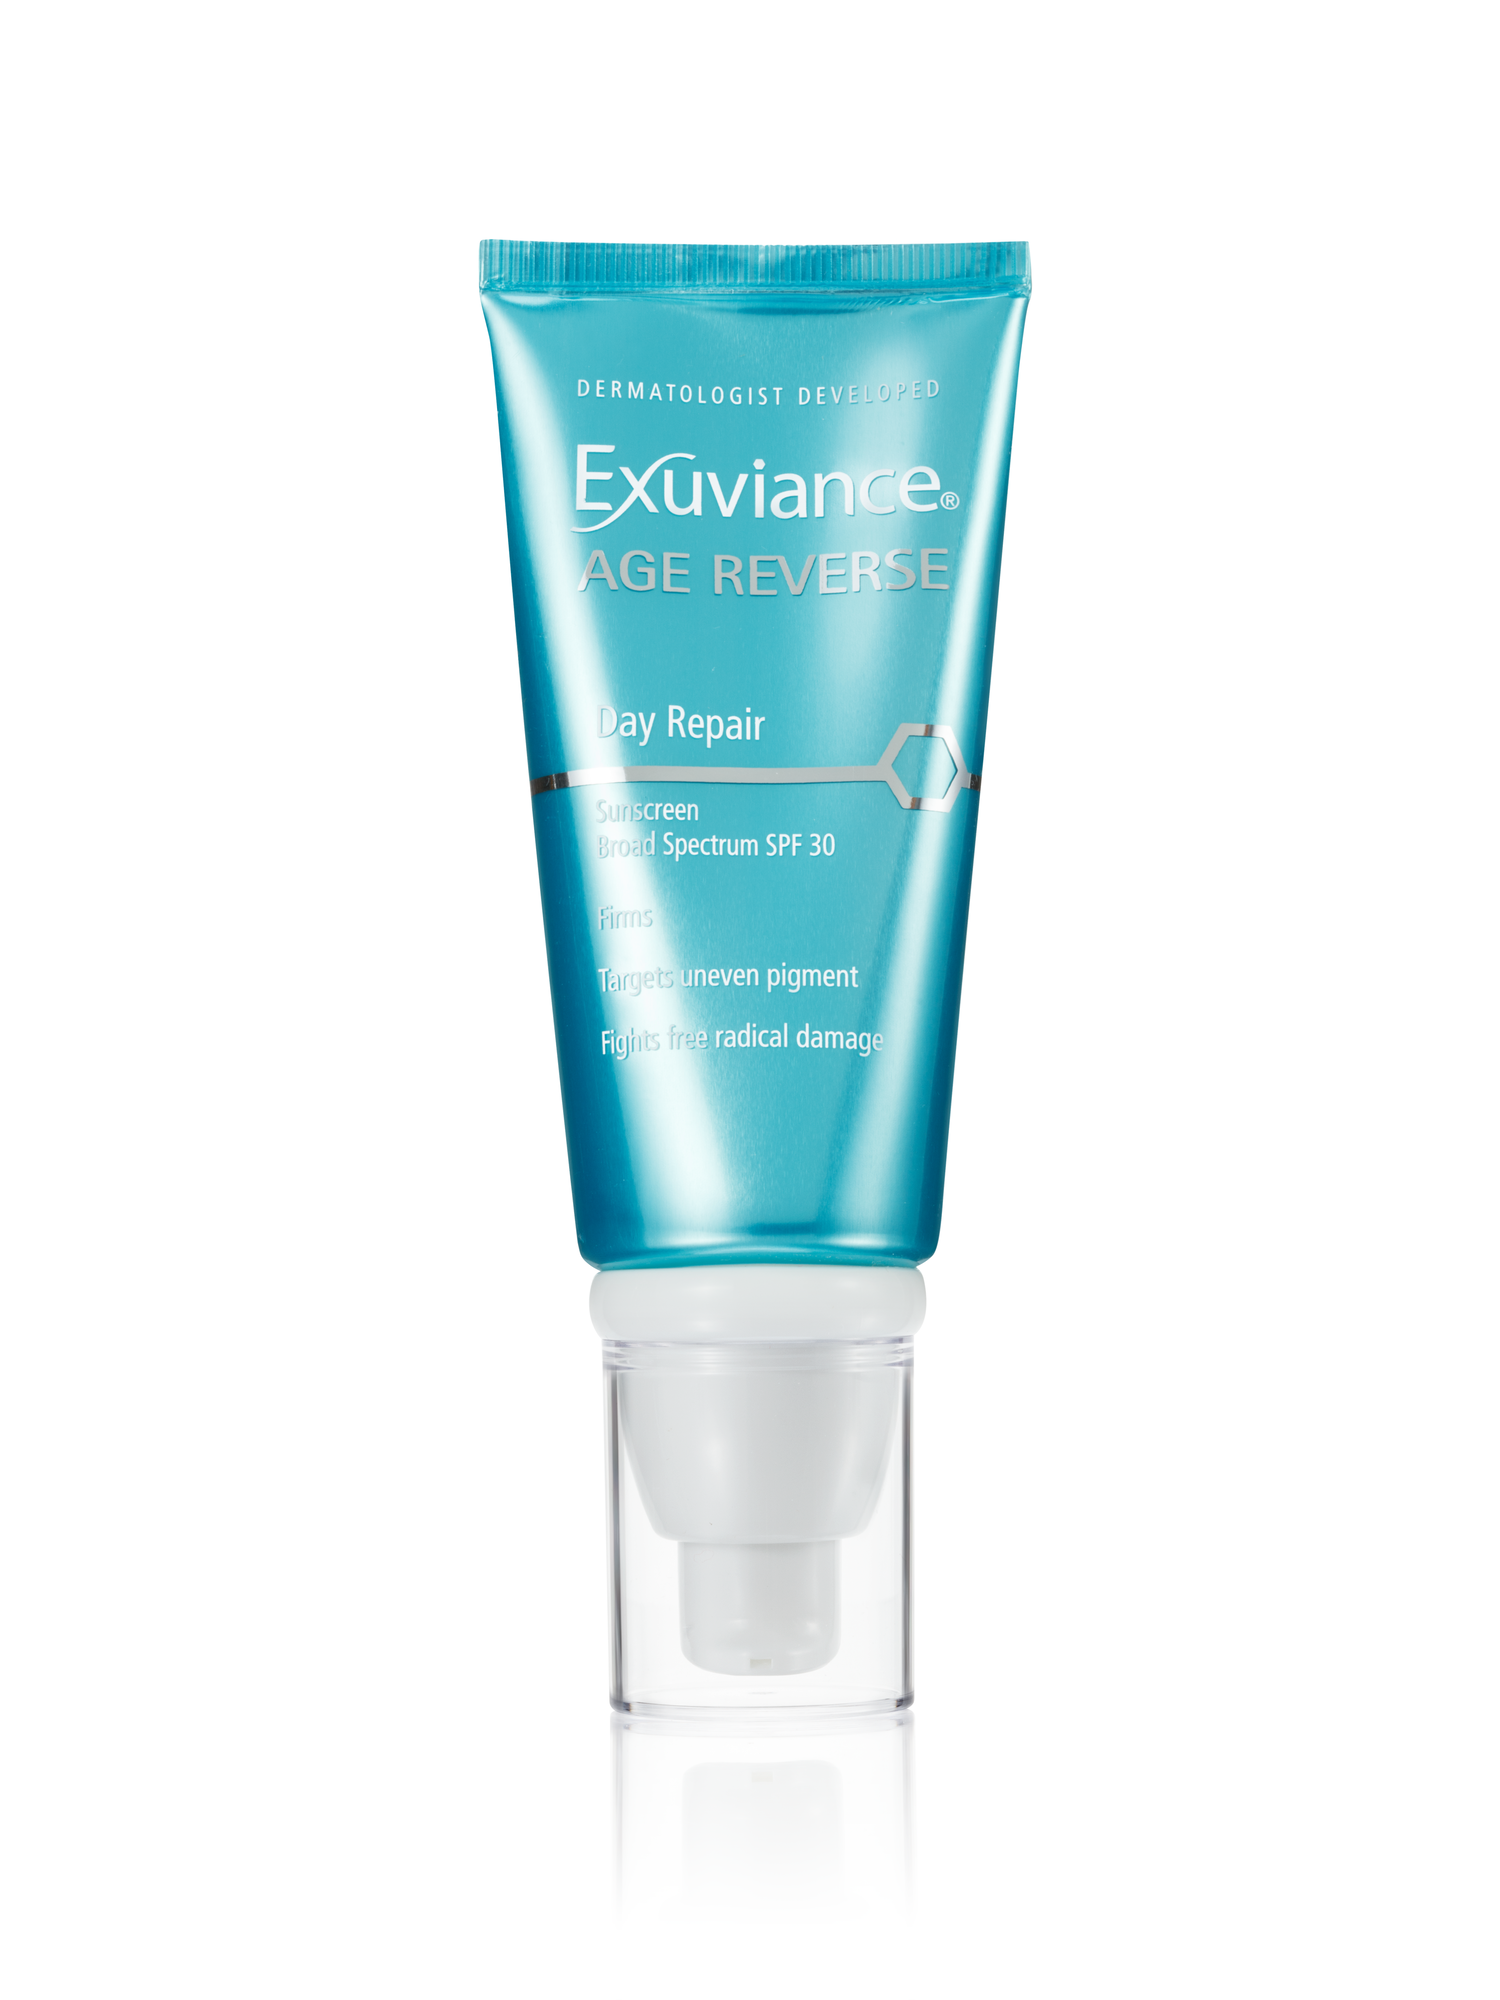 Exuviance_Age_Reverse_Day_Repair_spf30